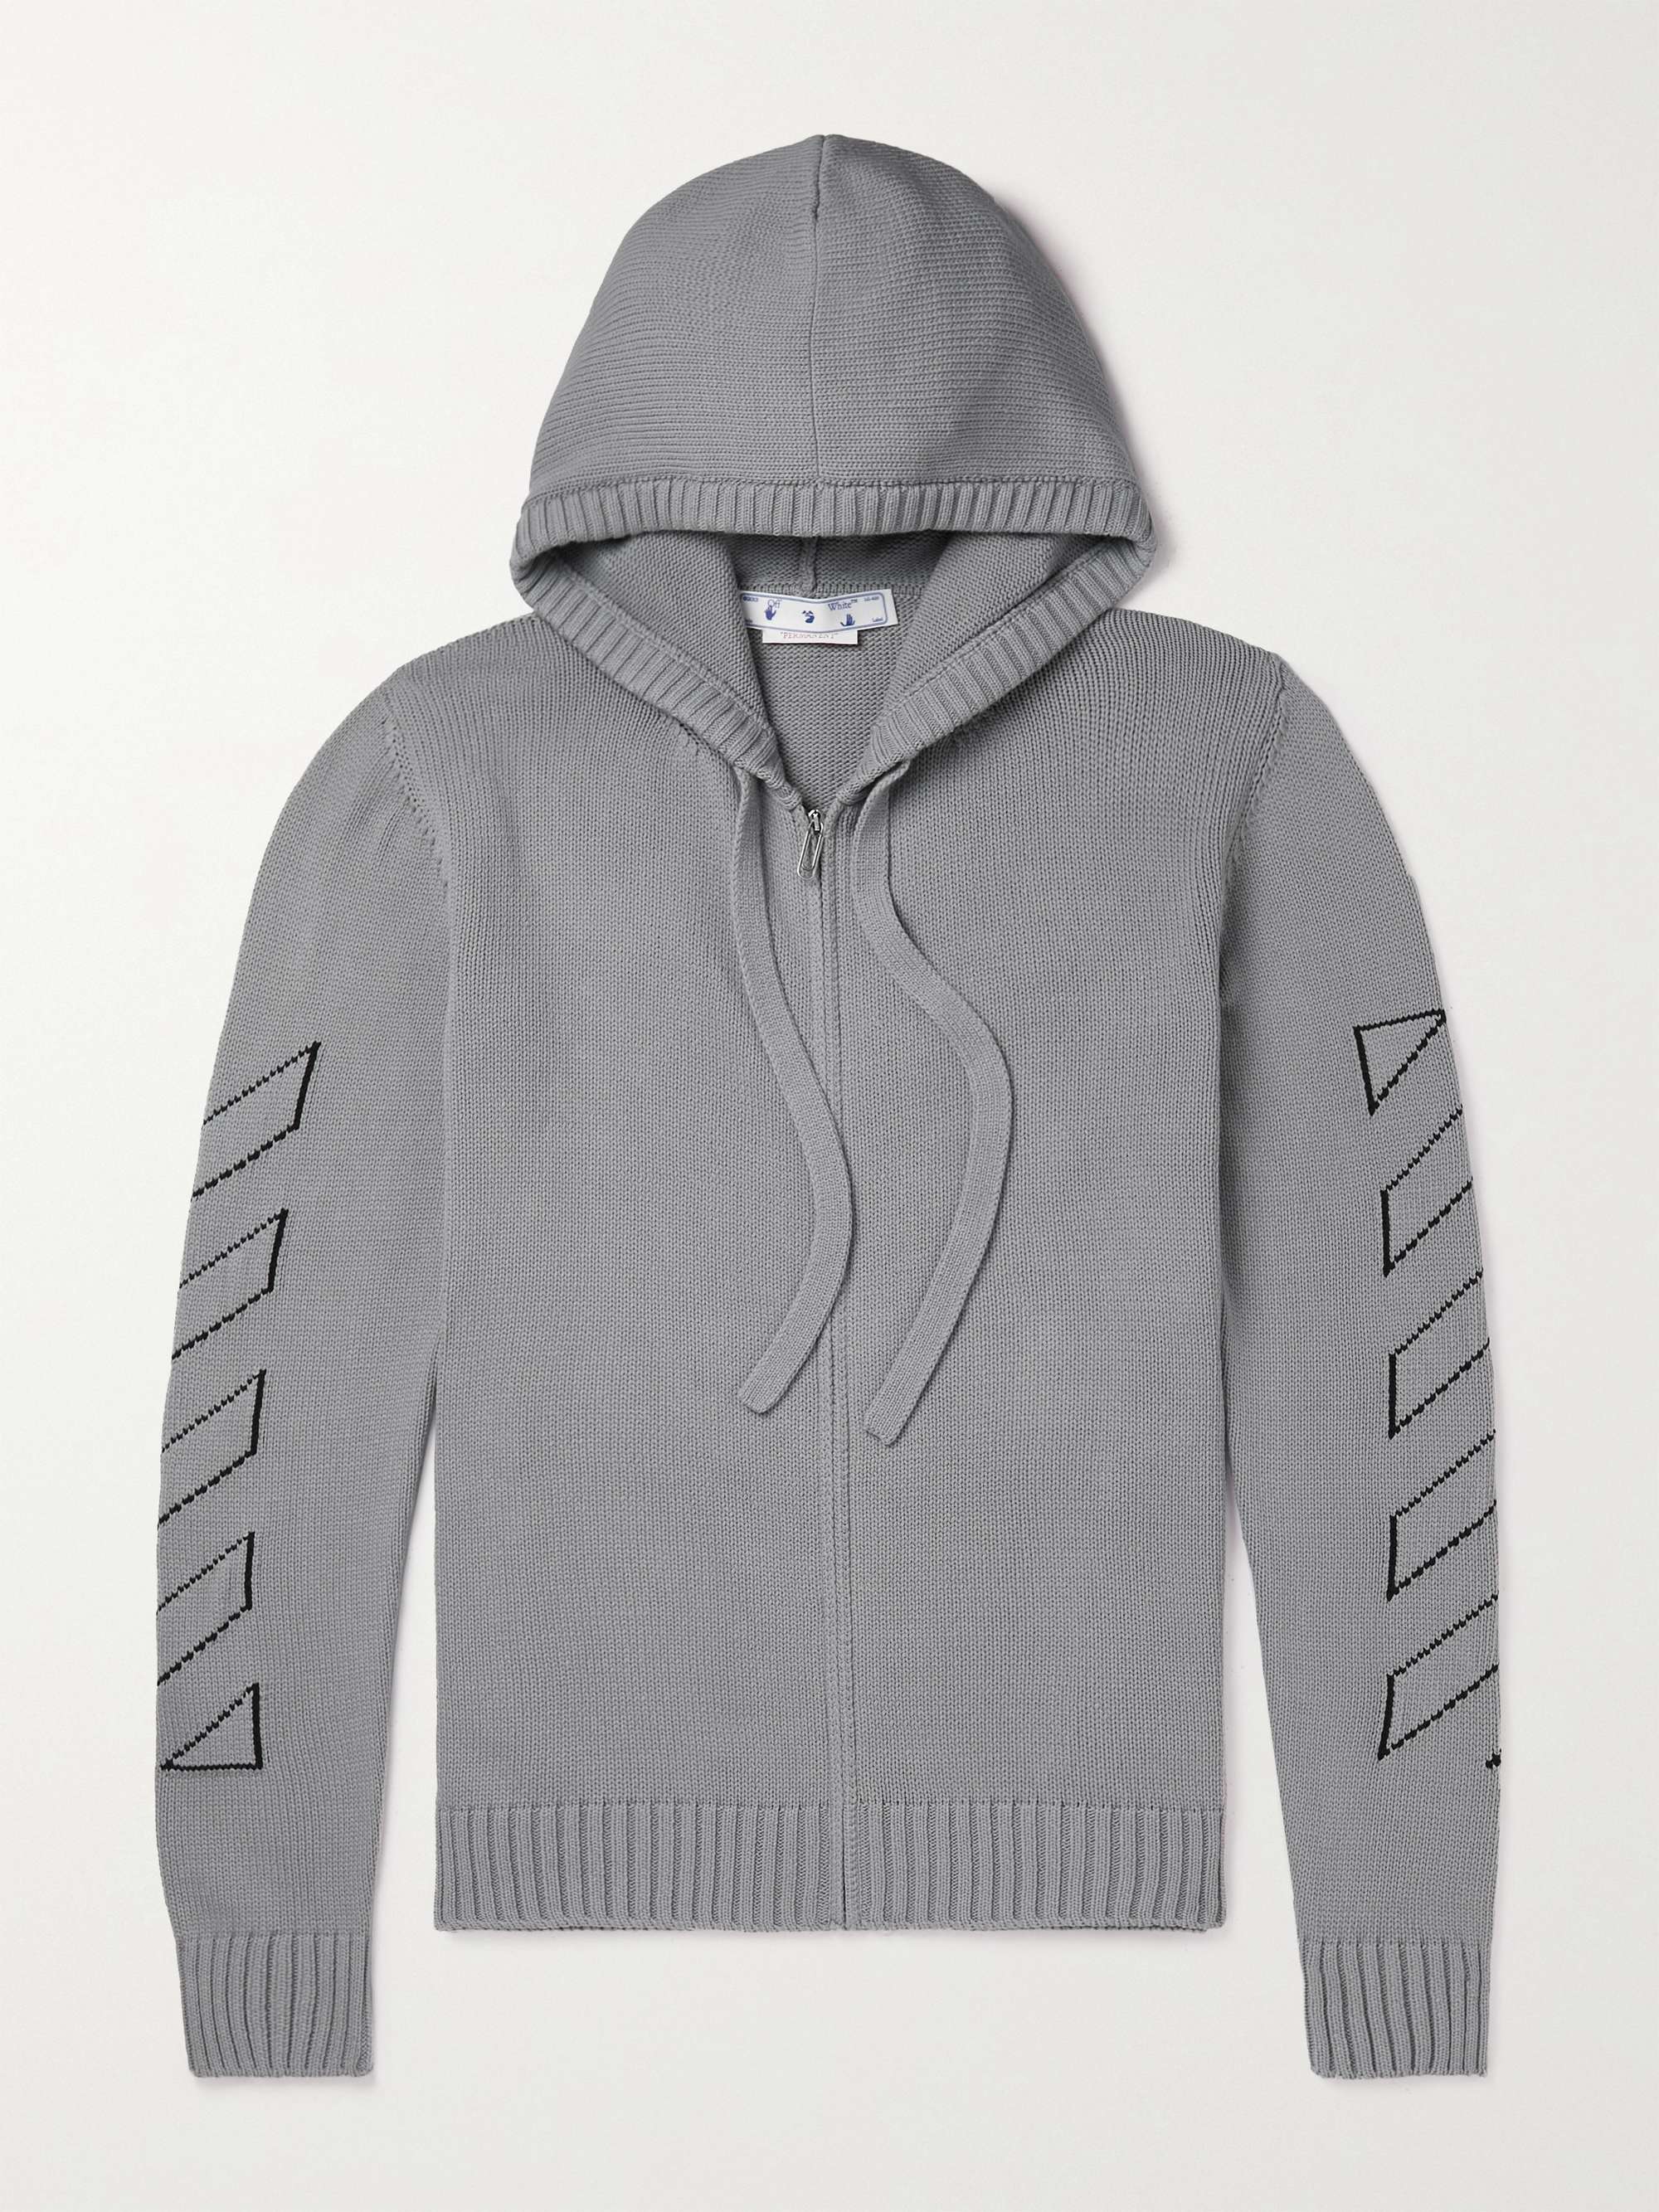 OFF-WHITE Intarsia Cotton-Blend Zip-Up Hoodie for Men | MR PORTER